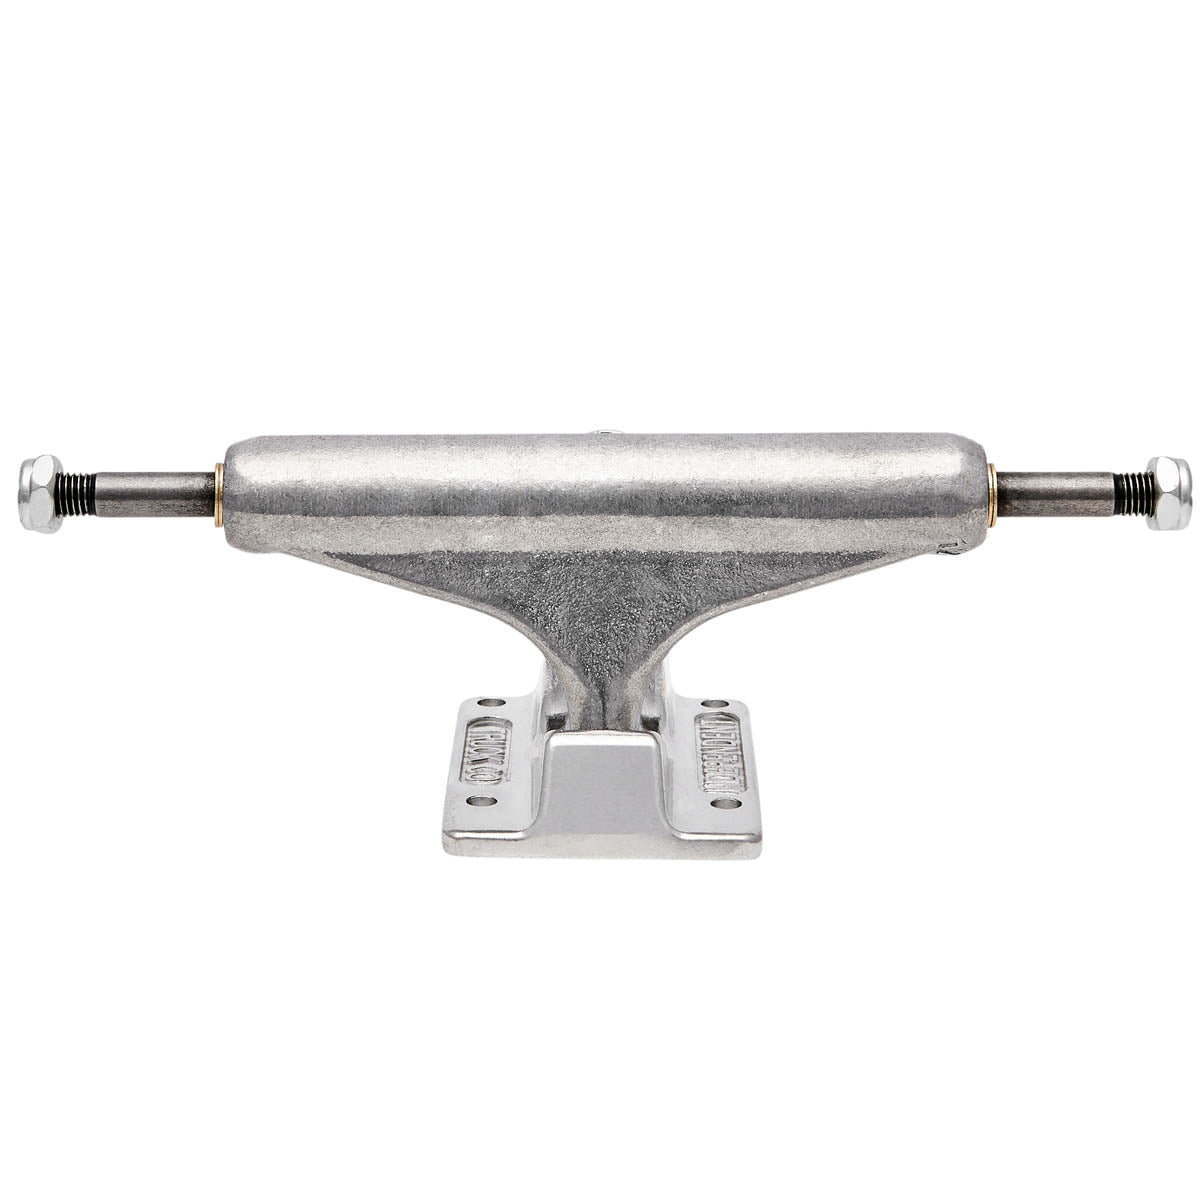 Independent Stage 11 Forged Hollow Standard Skateboard Trucks - Silver image 3